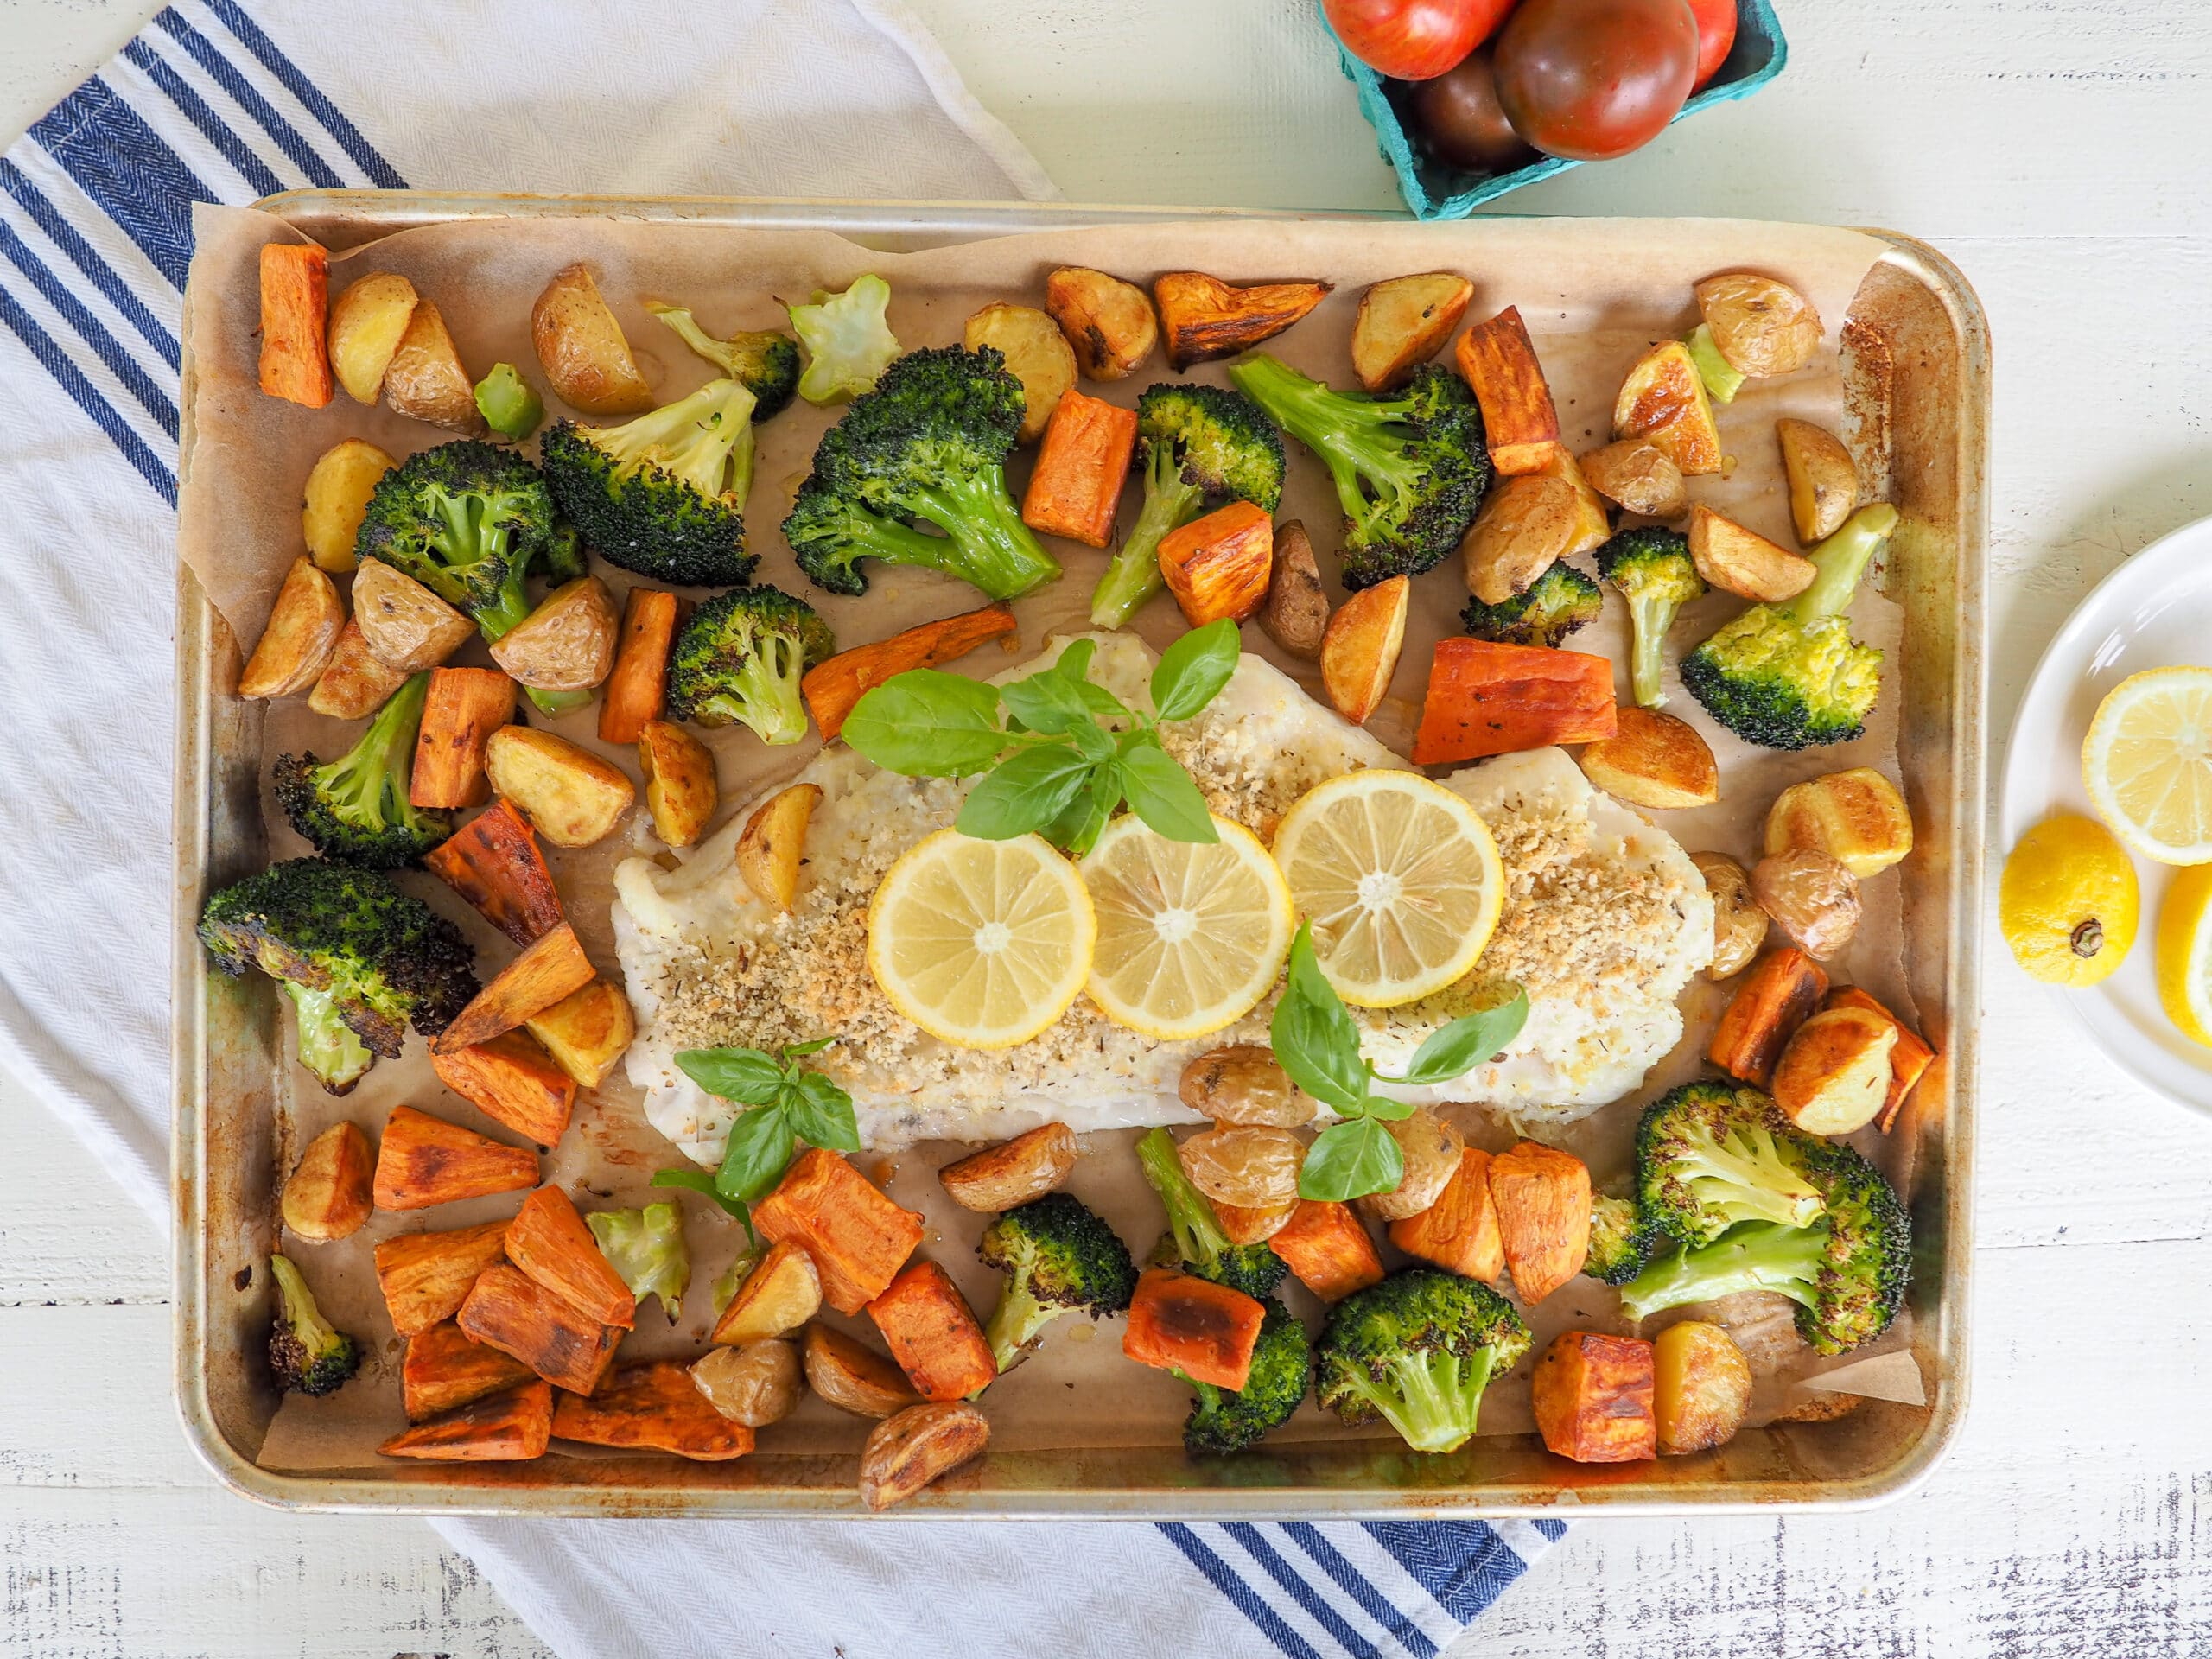 This sheet pan cod and veggie dinner makes weeknight seafood eating a breeze. Fresh cod pairs deliciously with roasted potatoes and broccoli. Add a side salad if you want some extra veggies and some Swedish rye crispbread with cheese or hummus if you have hungry, growing kids!